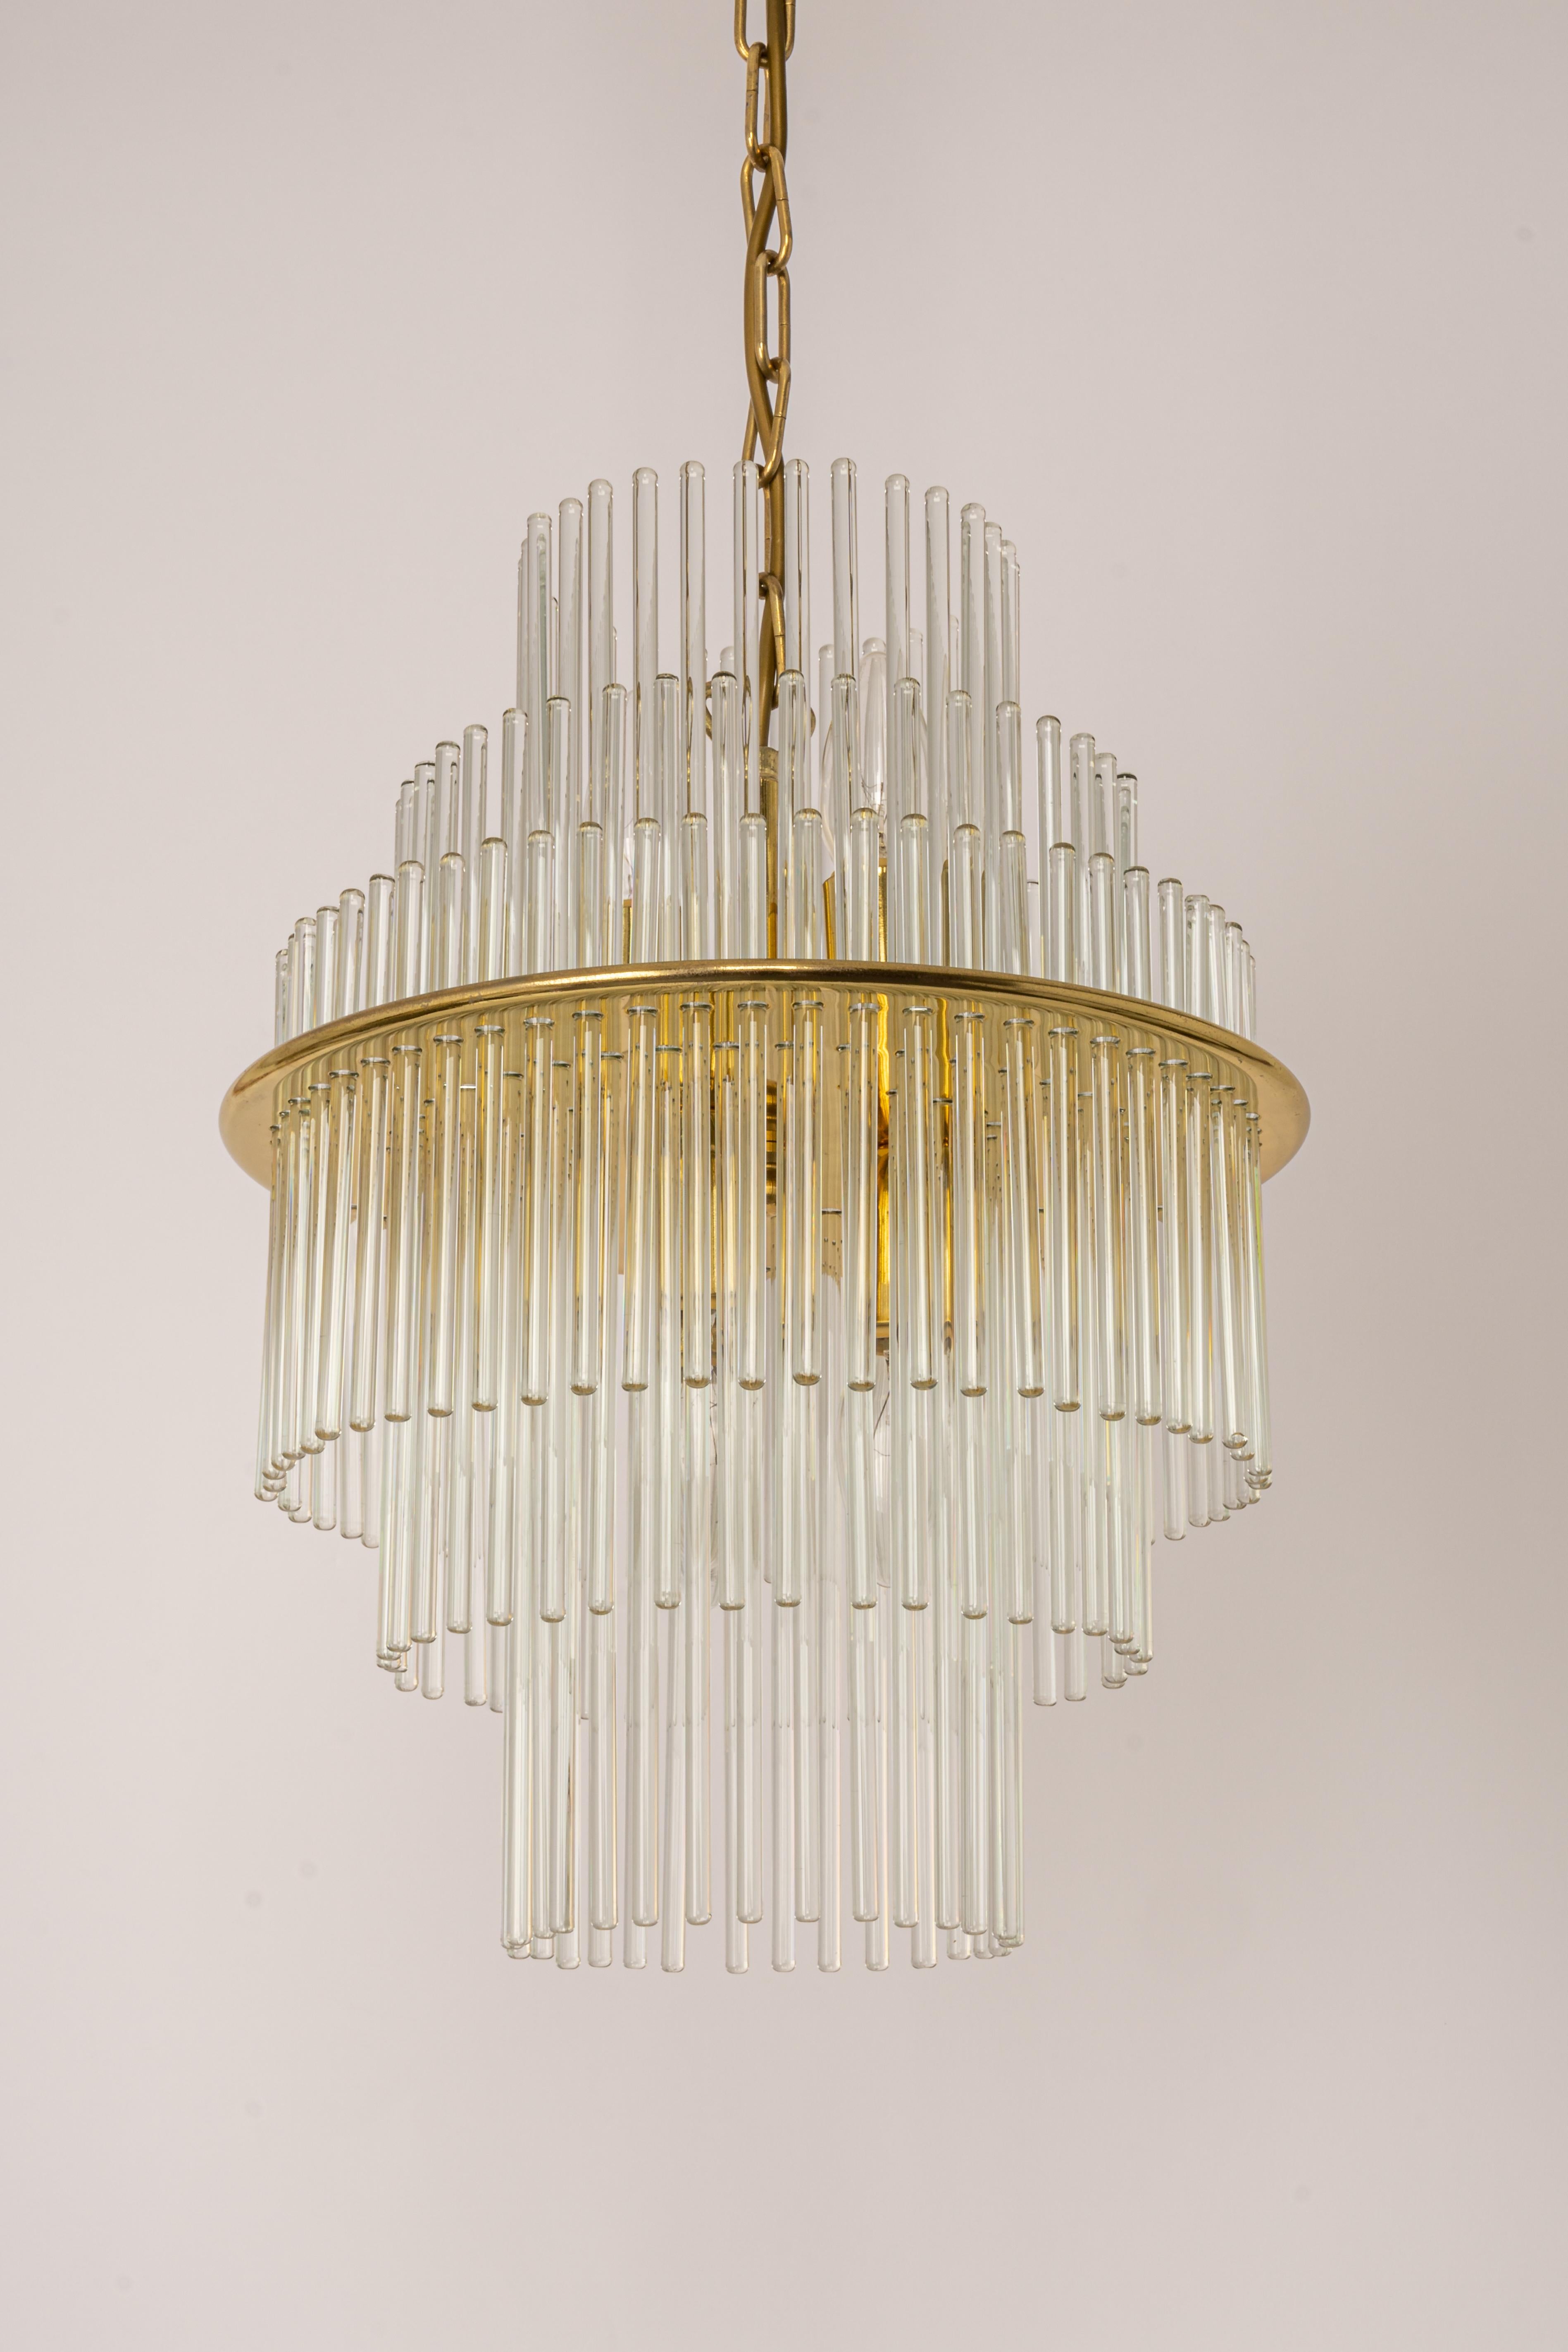 1 of 2 Petite Crystal Glass Rod Pendant Light, Germany, 1970s In Good Condition For Sale In Aachen, NRW